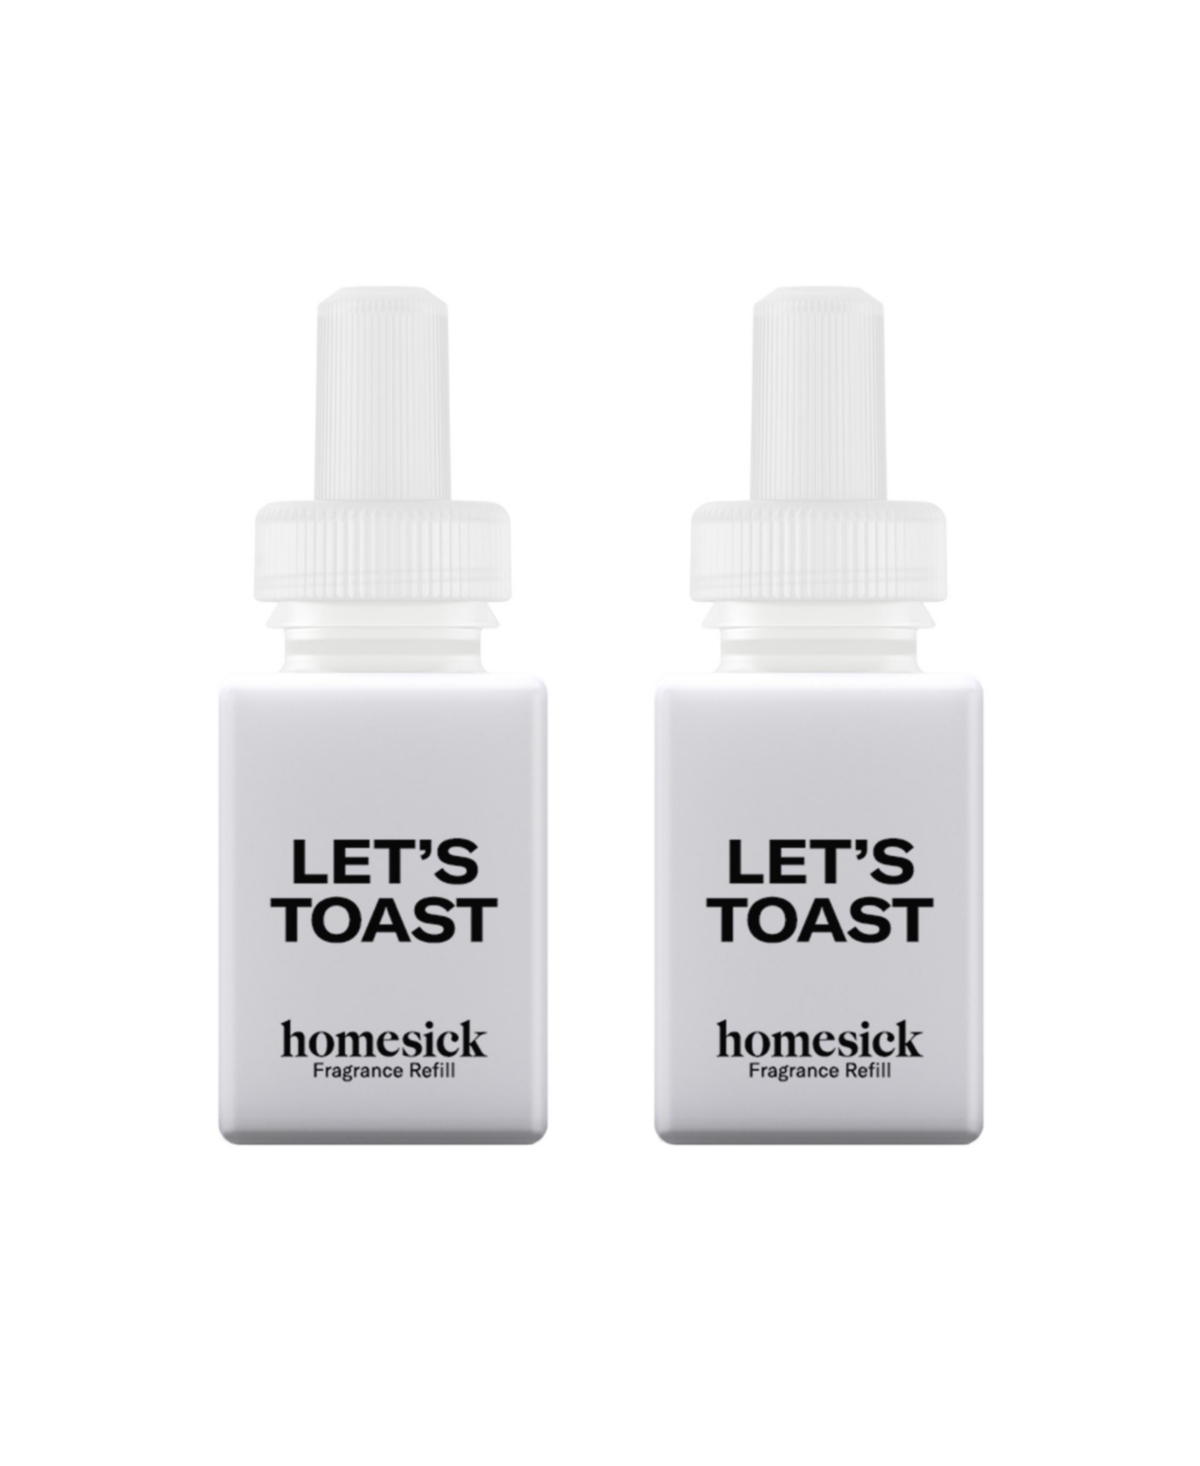 Homesick - Let's Toast - Home Scent Refill - Smart Home Air Diffuser Fragrance - Up to 120-Hours of Luxury Fragrance per Refill - Clean & Safe Di